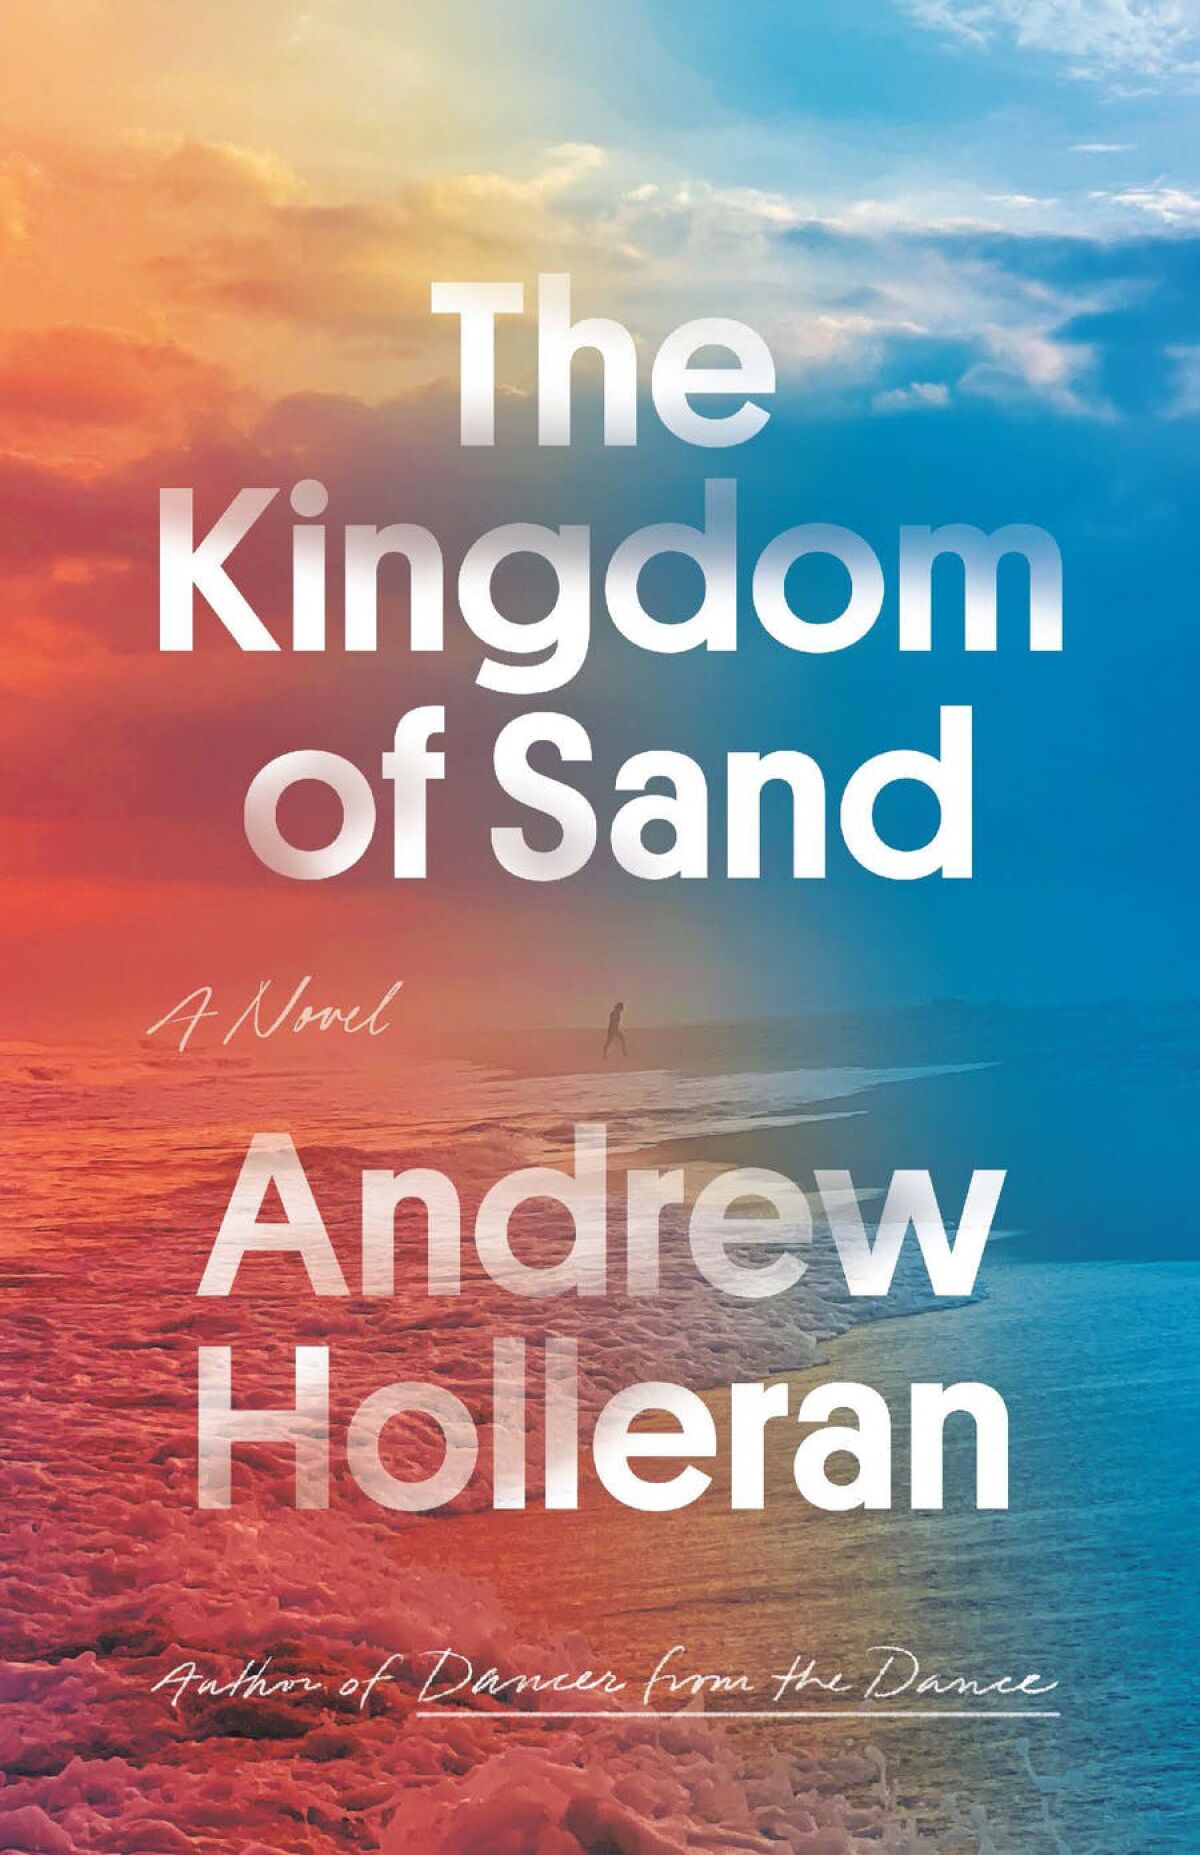 andrew holleran the kingdom of sand